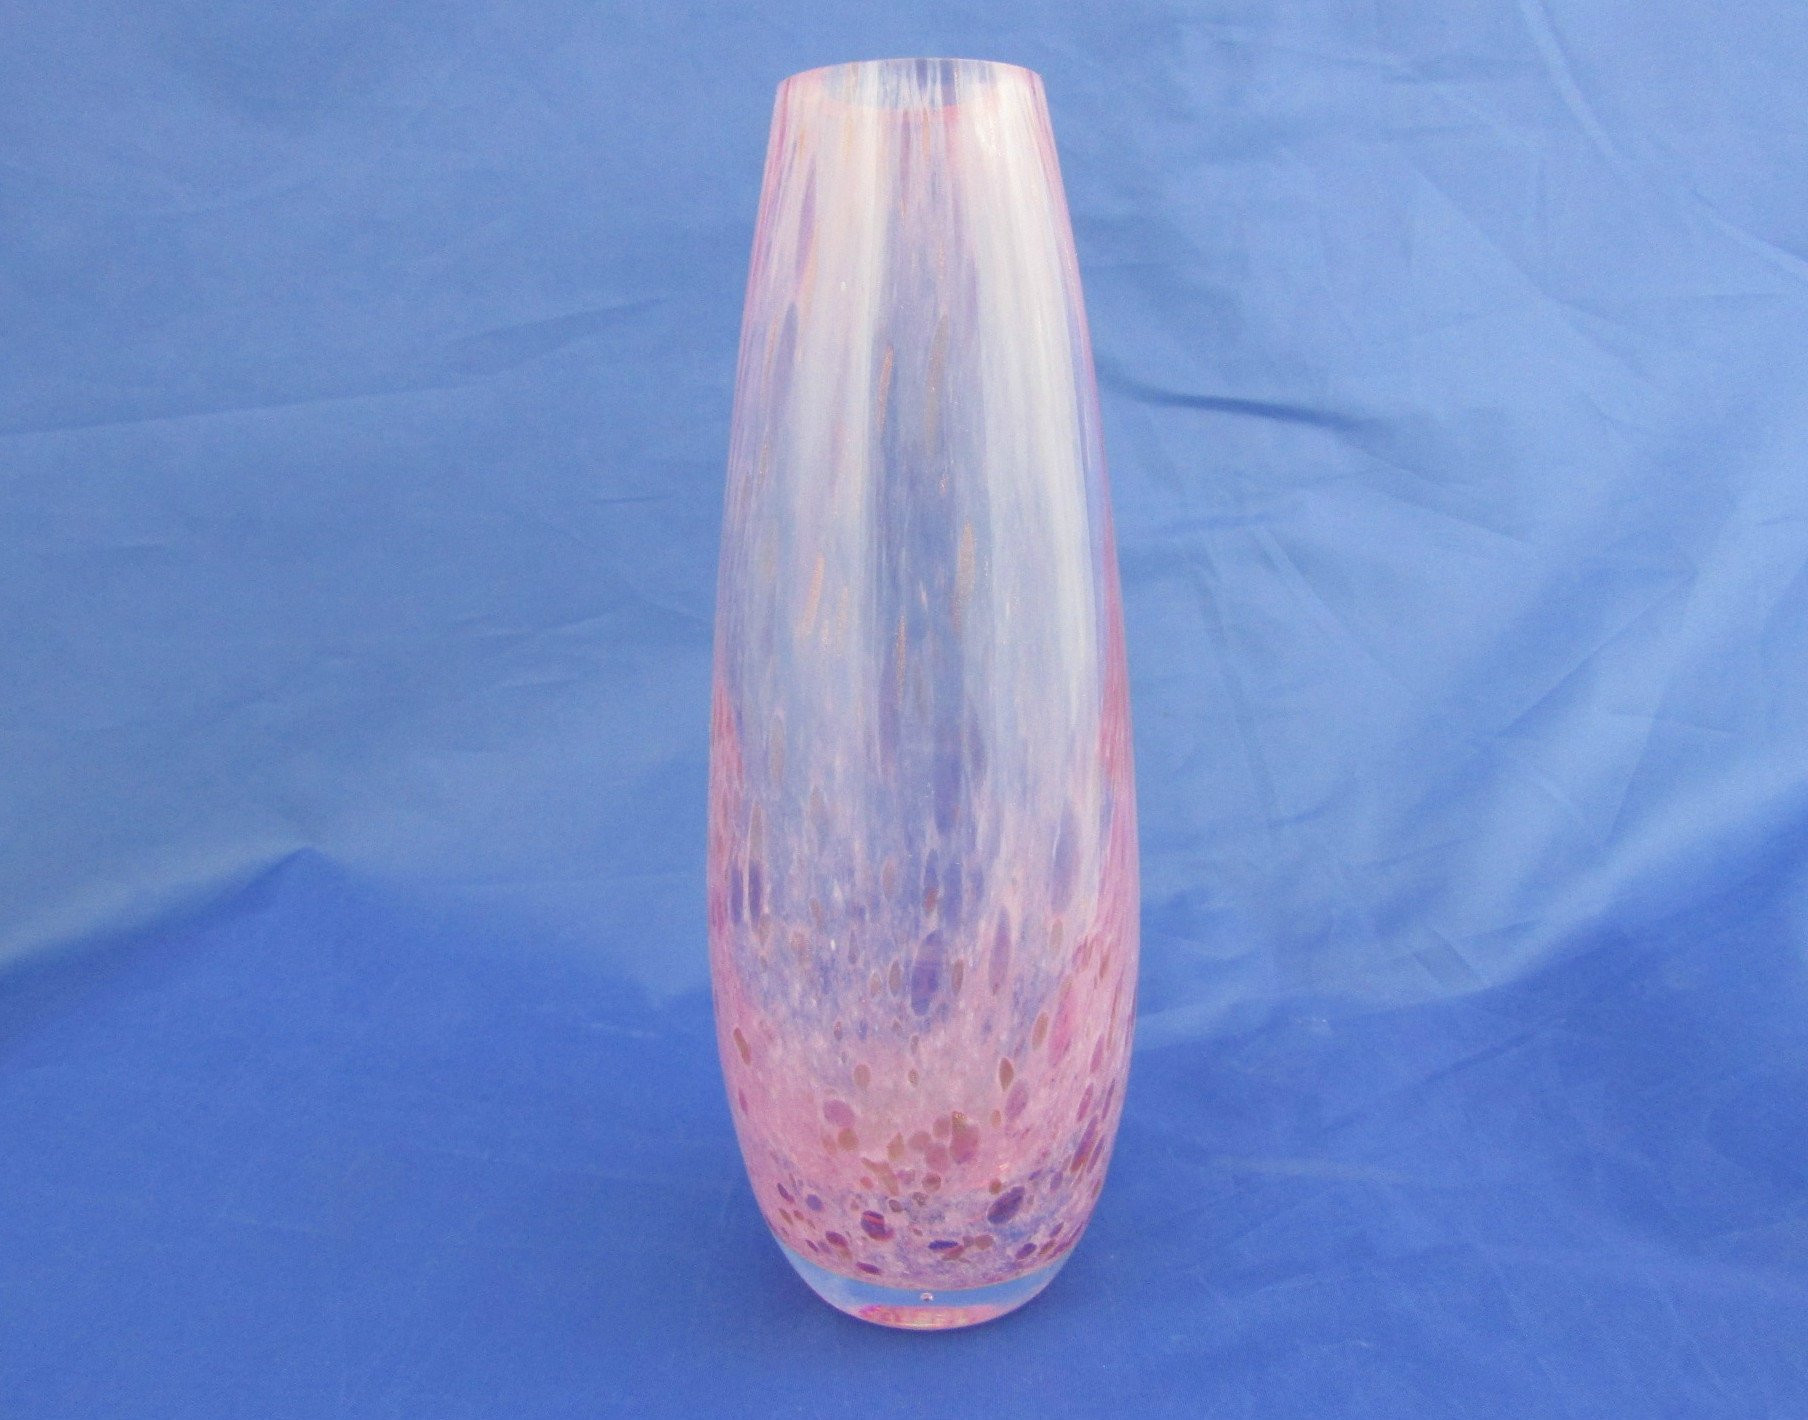 10 Lovely Amber Colored Glass Vases 2023 free download amber colored glass vases of caithness glass vase teardrop shaped vase pink spatter glass etsy within dc29fc294c28ezoom